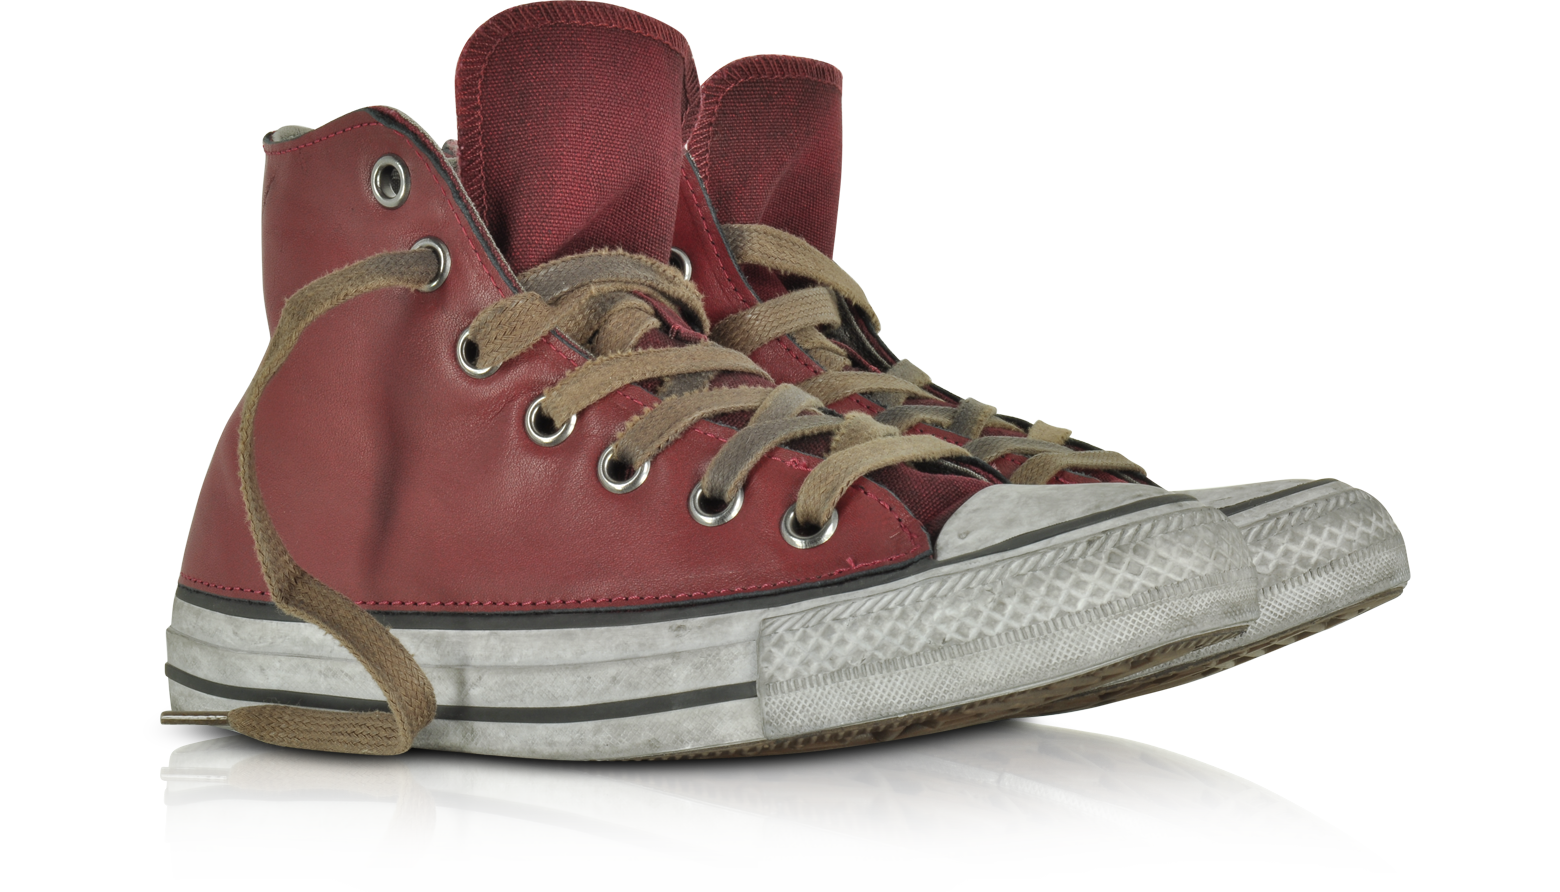 converse chuck taylor all star leather limited edition